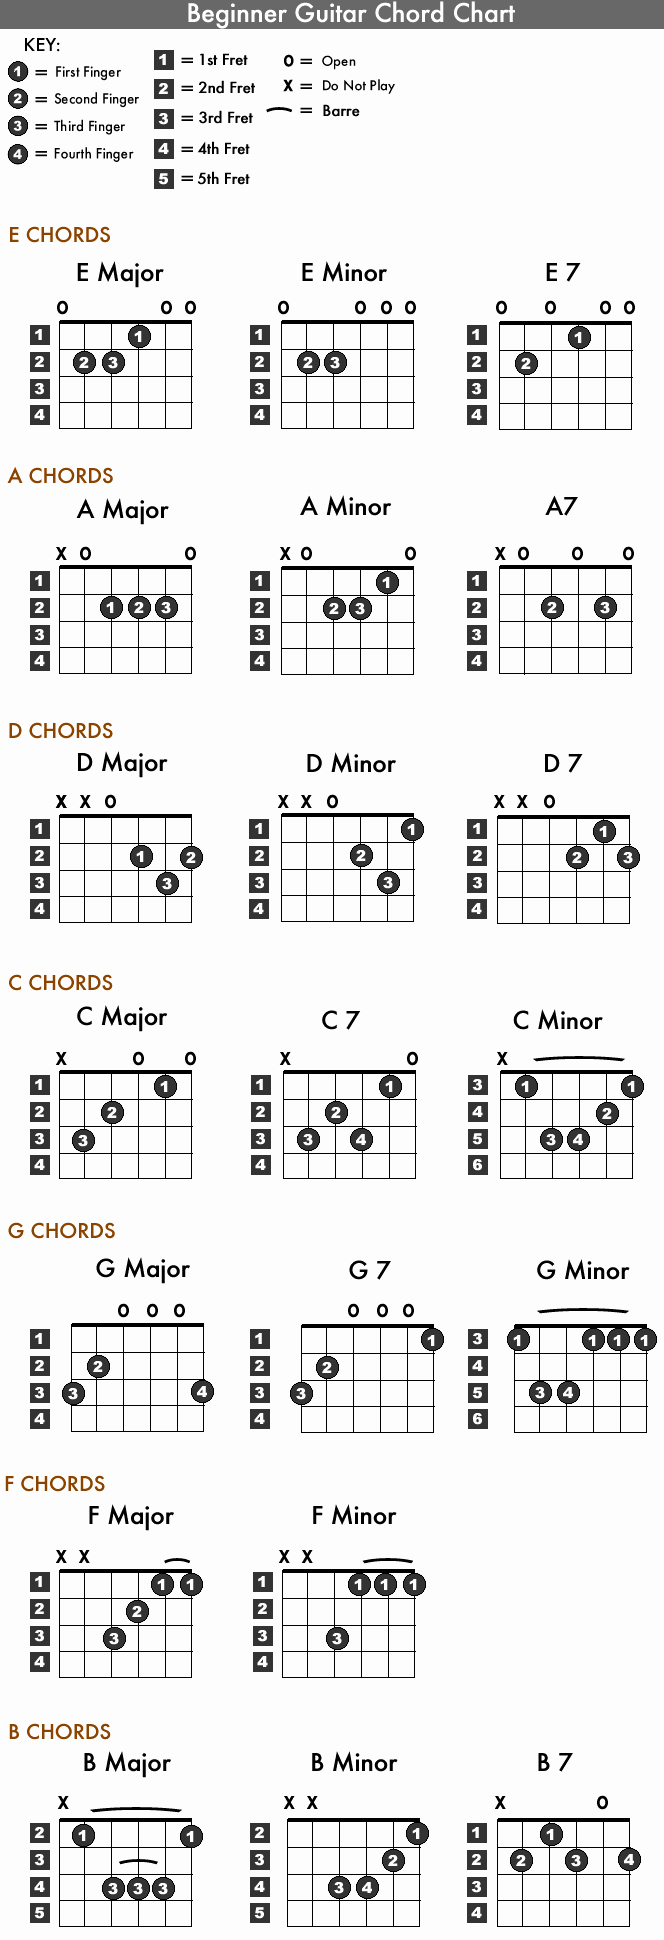 Beginner Guitar Chords Chart Luxury Self Learning How to Play Guitar